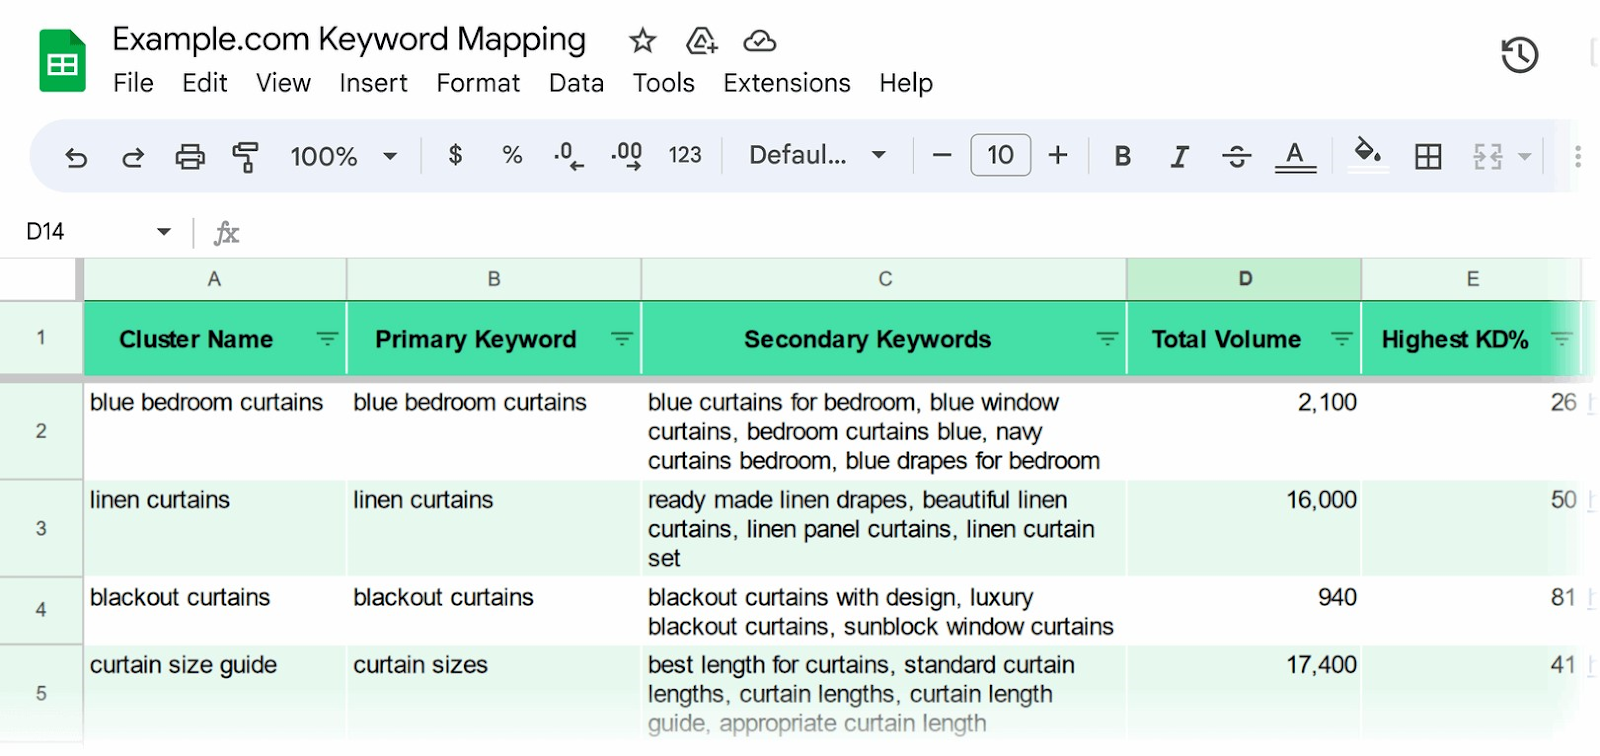 keyword map with columns for cluster name, primary keyword, secondary keywords, total volume and highest KD%